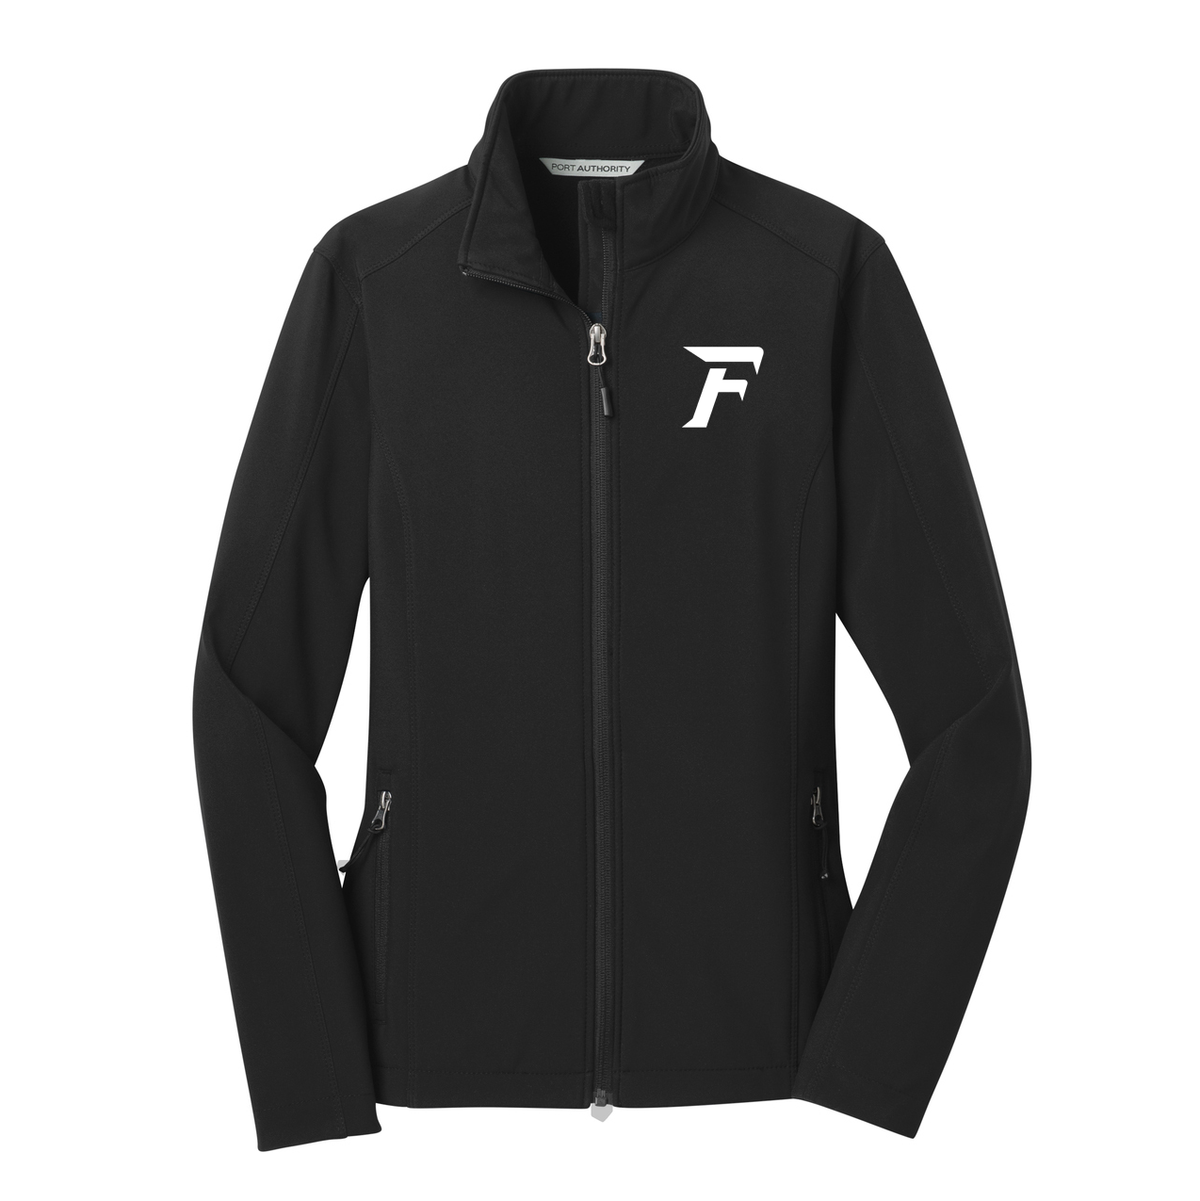 Foothill Falcons Women's Soft Shell Jacket